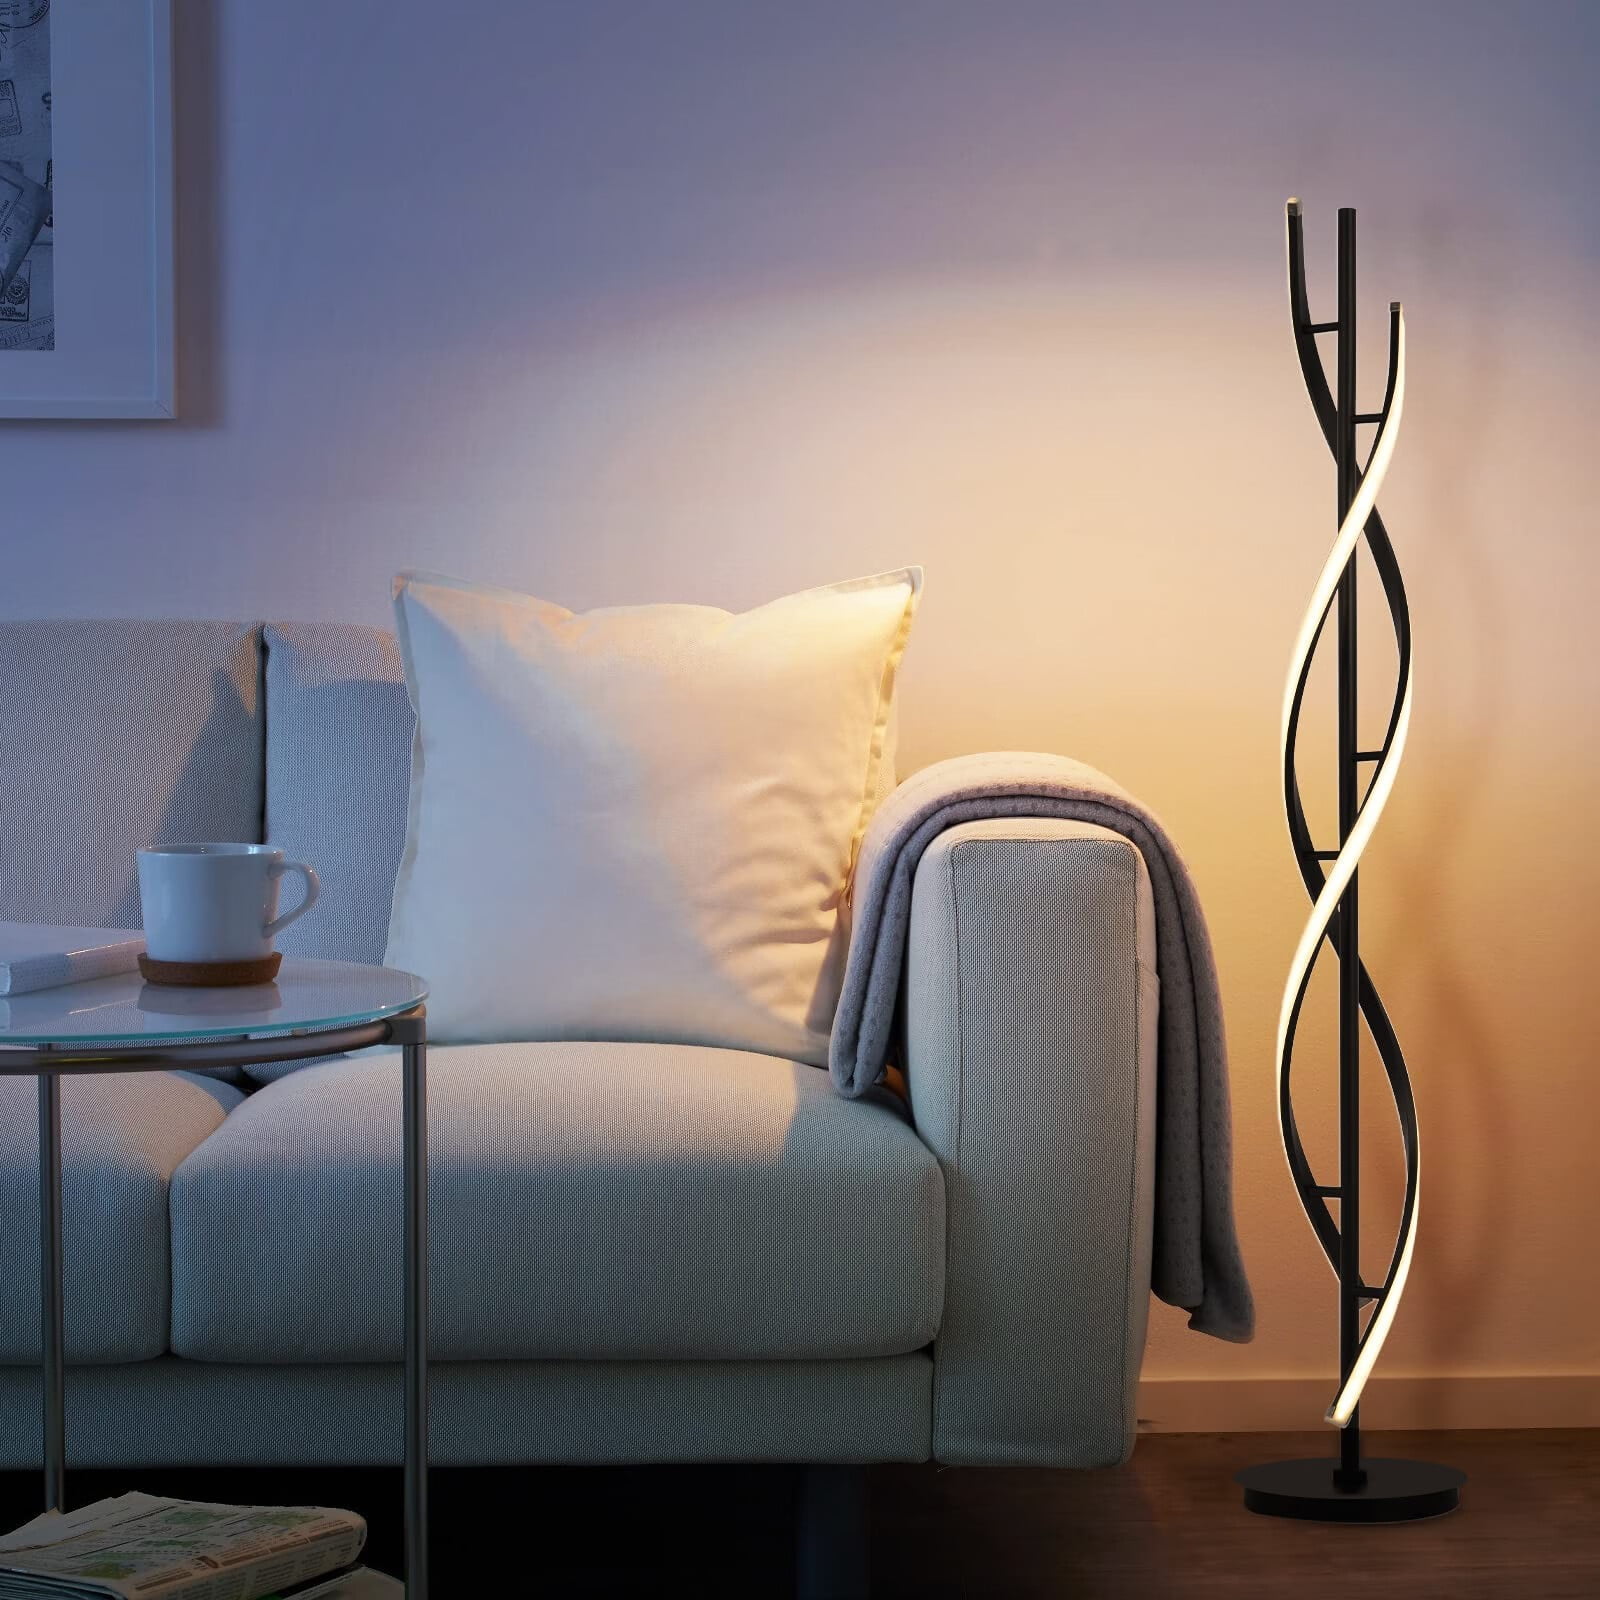 pge-led-spiral-floor-lamp-dimmable-warm-white-dinning-living-room